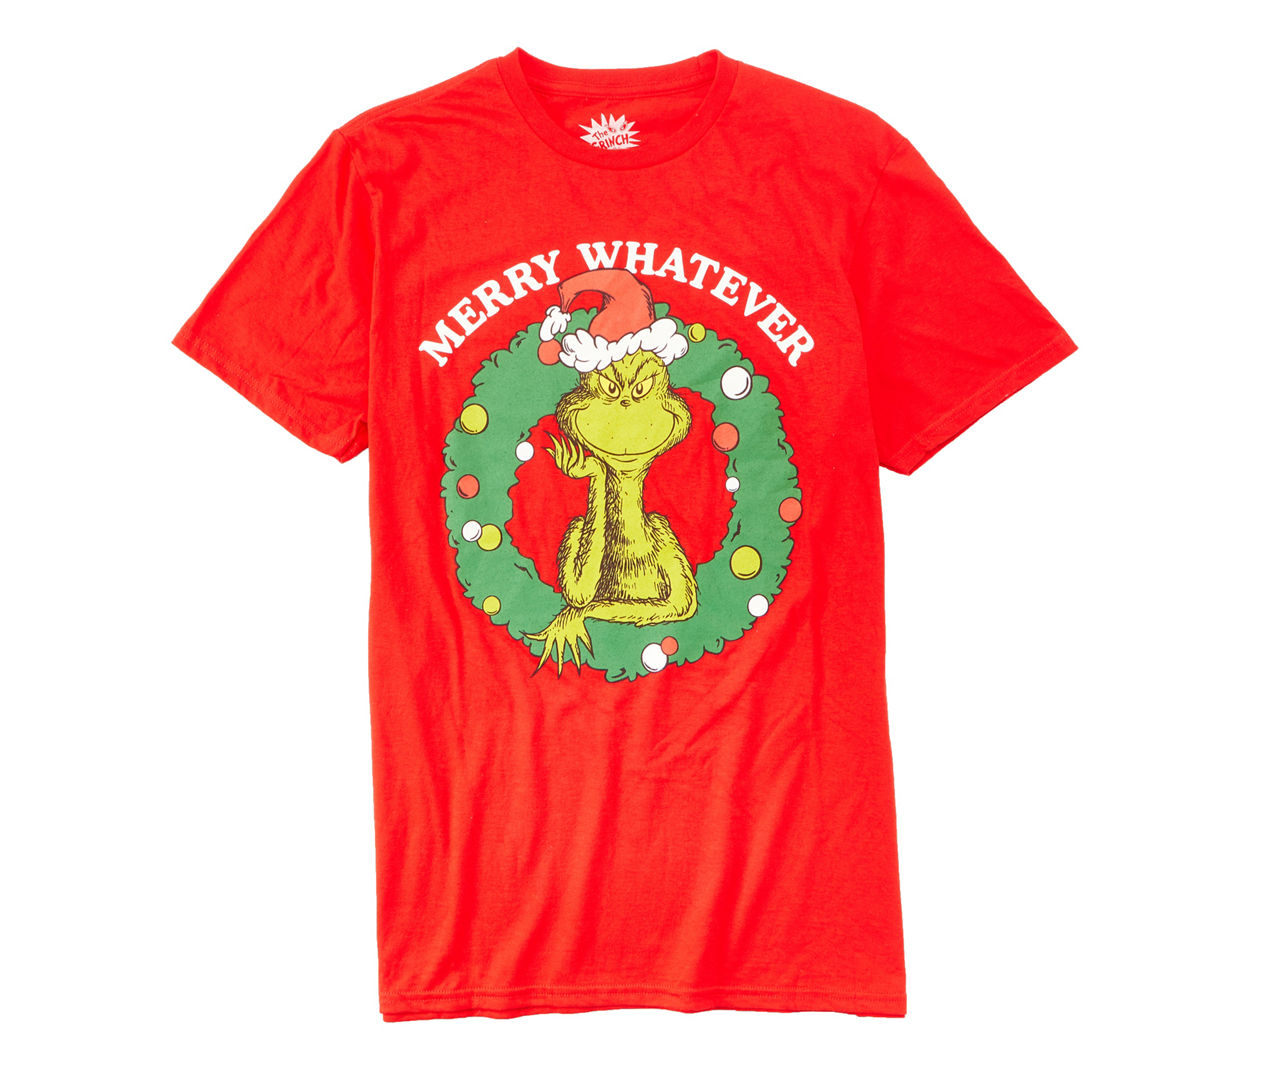 Men's Size L "Merry Whatever" Red Grinch Graphic Tee